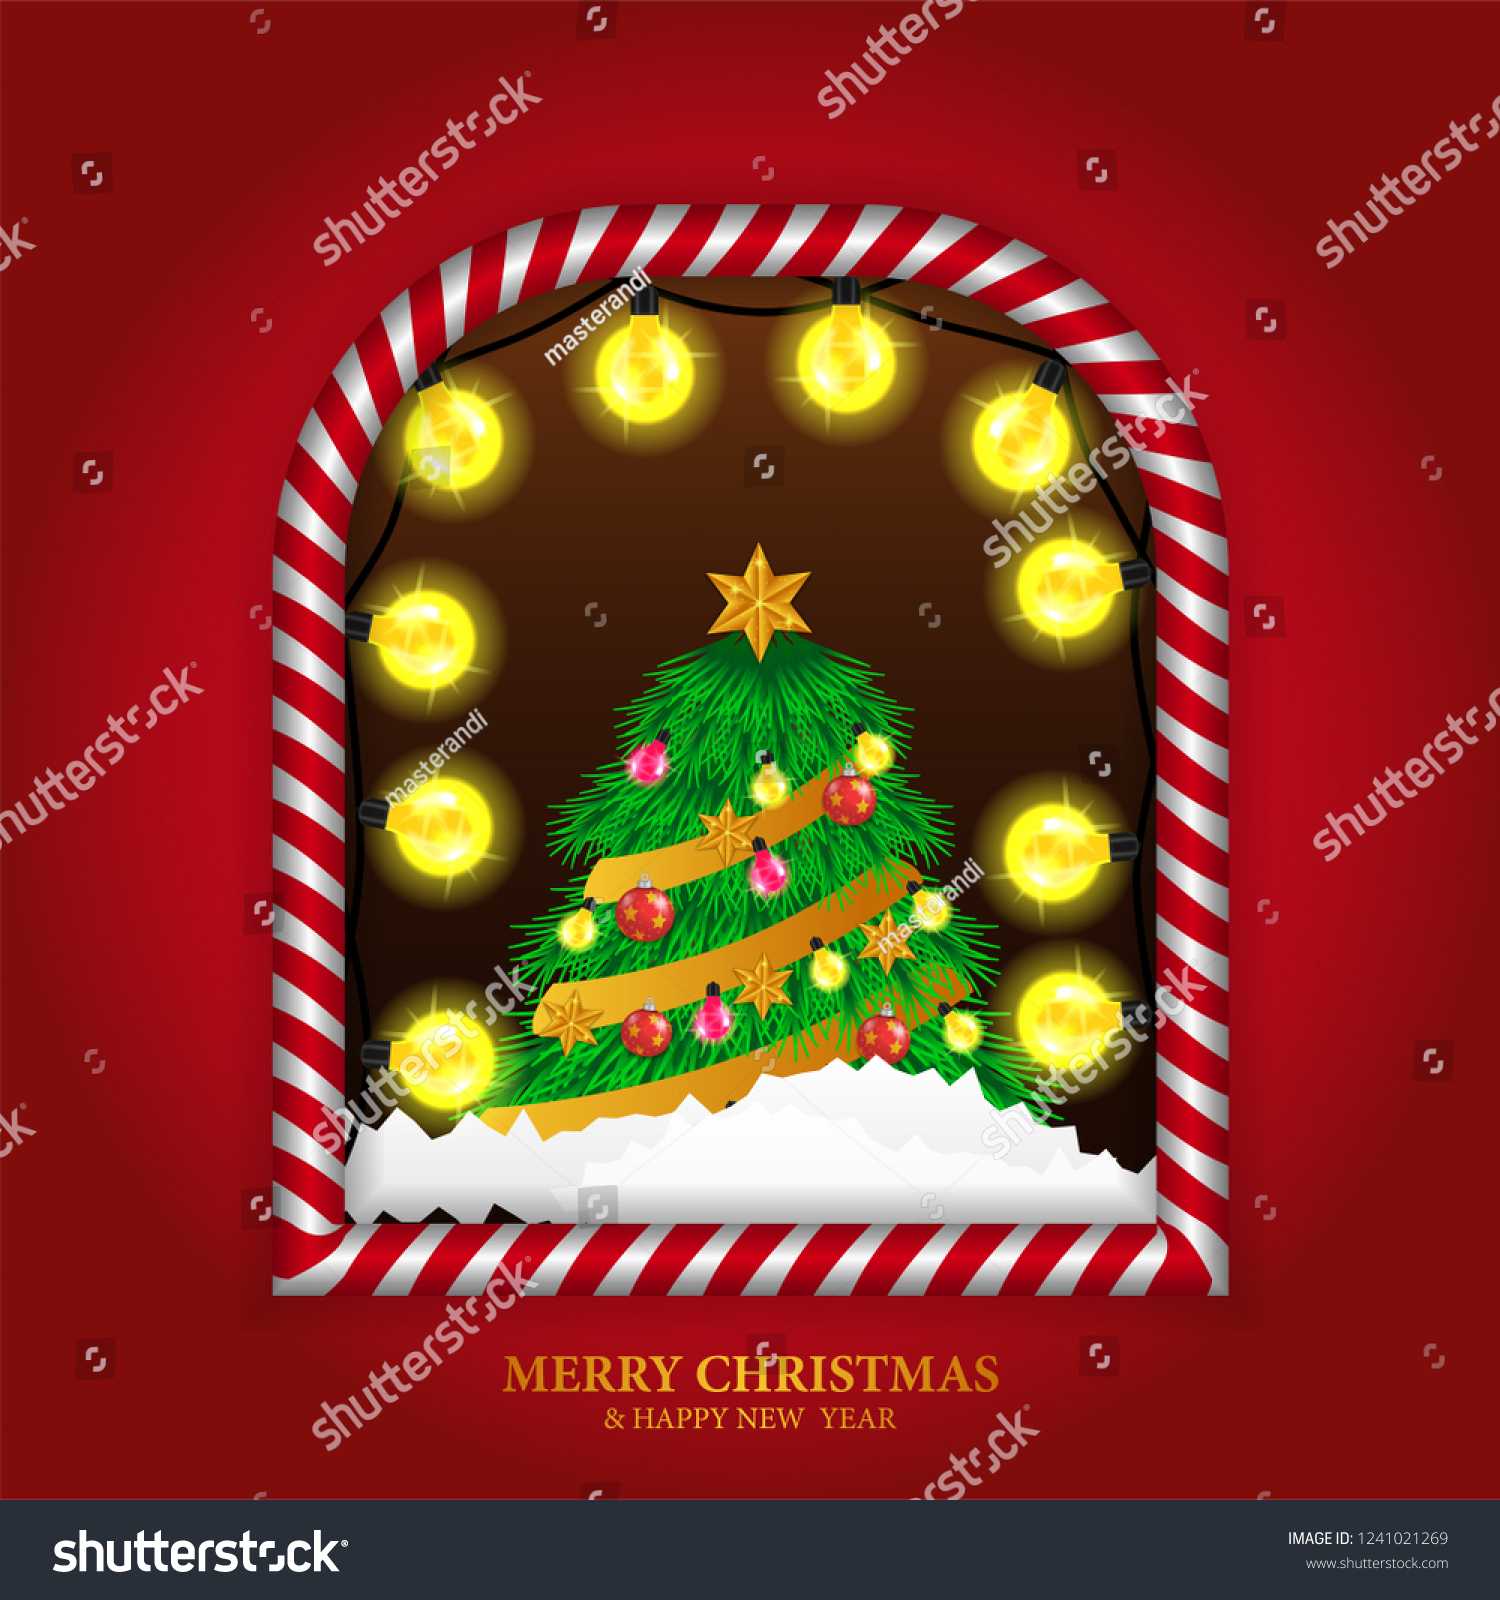 Merry Christmas Banner Template Windows Frame Stock Vector Pertaining To Merry Christmas Banner Template